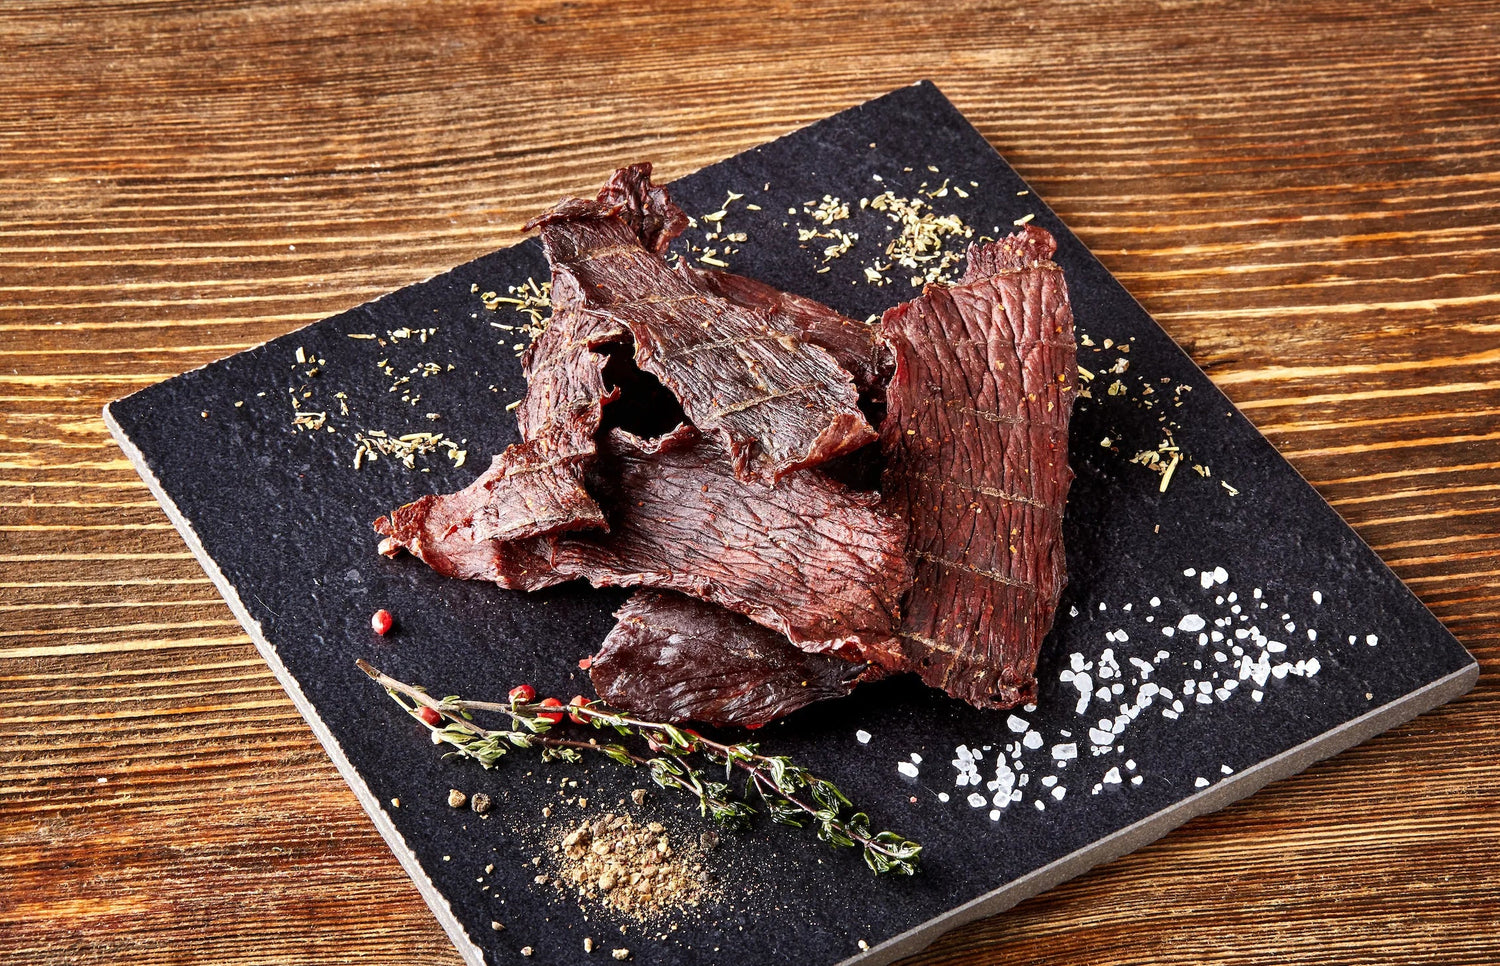 How to Make Good Beef Jerky in an Electric Smoker